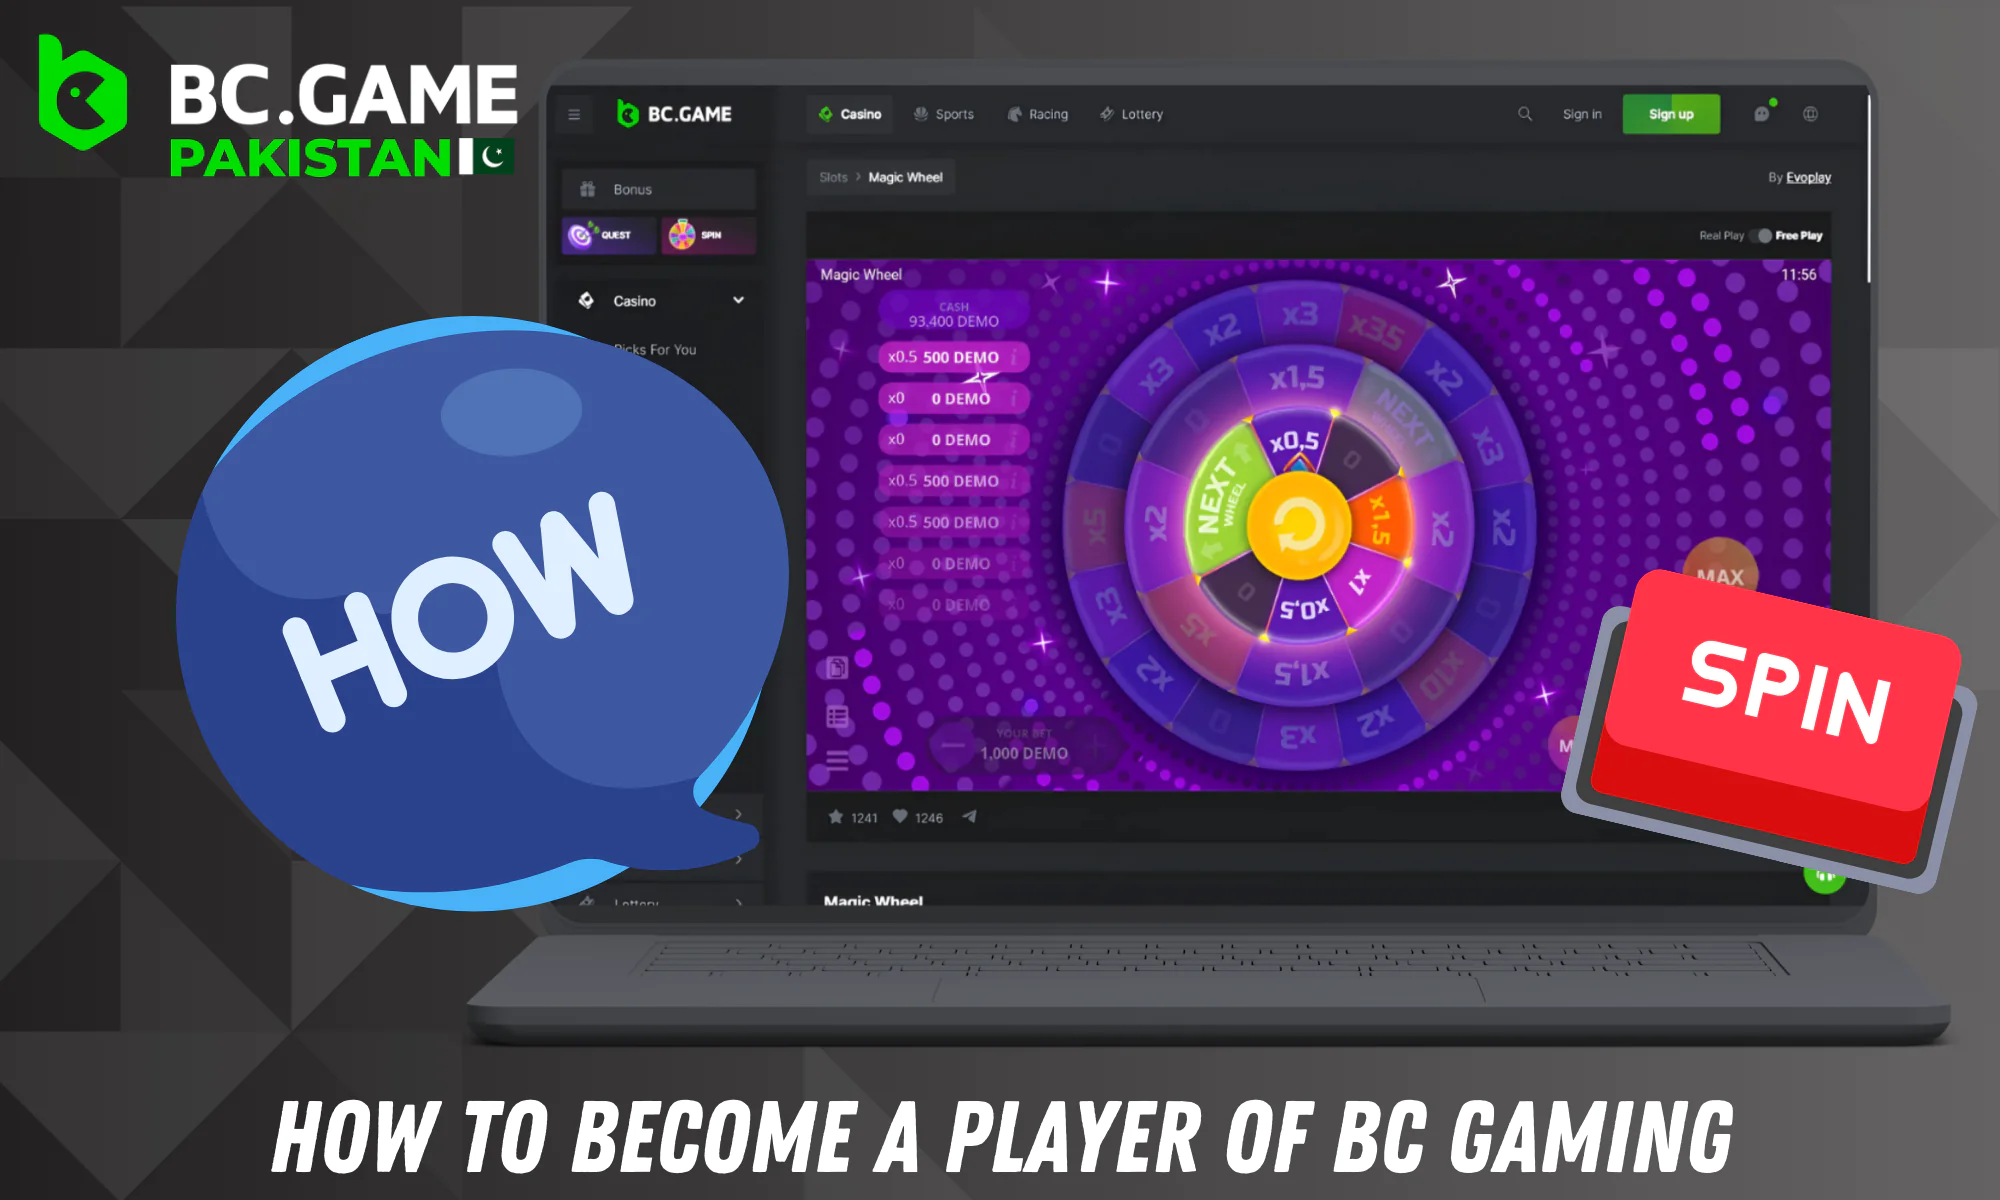 Detailed step-by-step instructions on how to start playing BC.Game